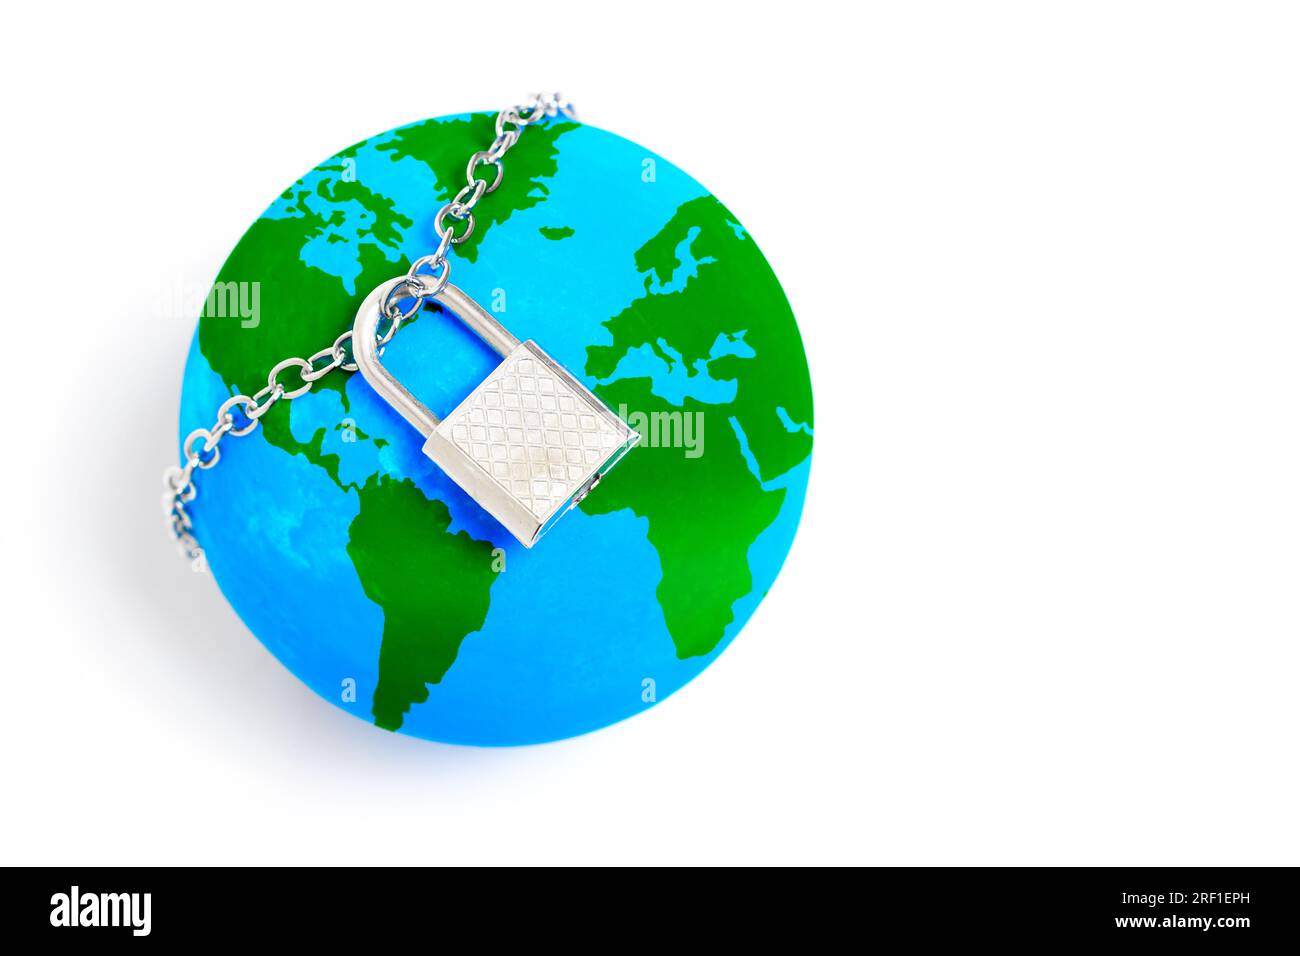 Miniature globe secured with a chained padlock, symbolizing the confinement and restrictions imposed on the interconnected world. Global challenges, h Stock Photo